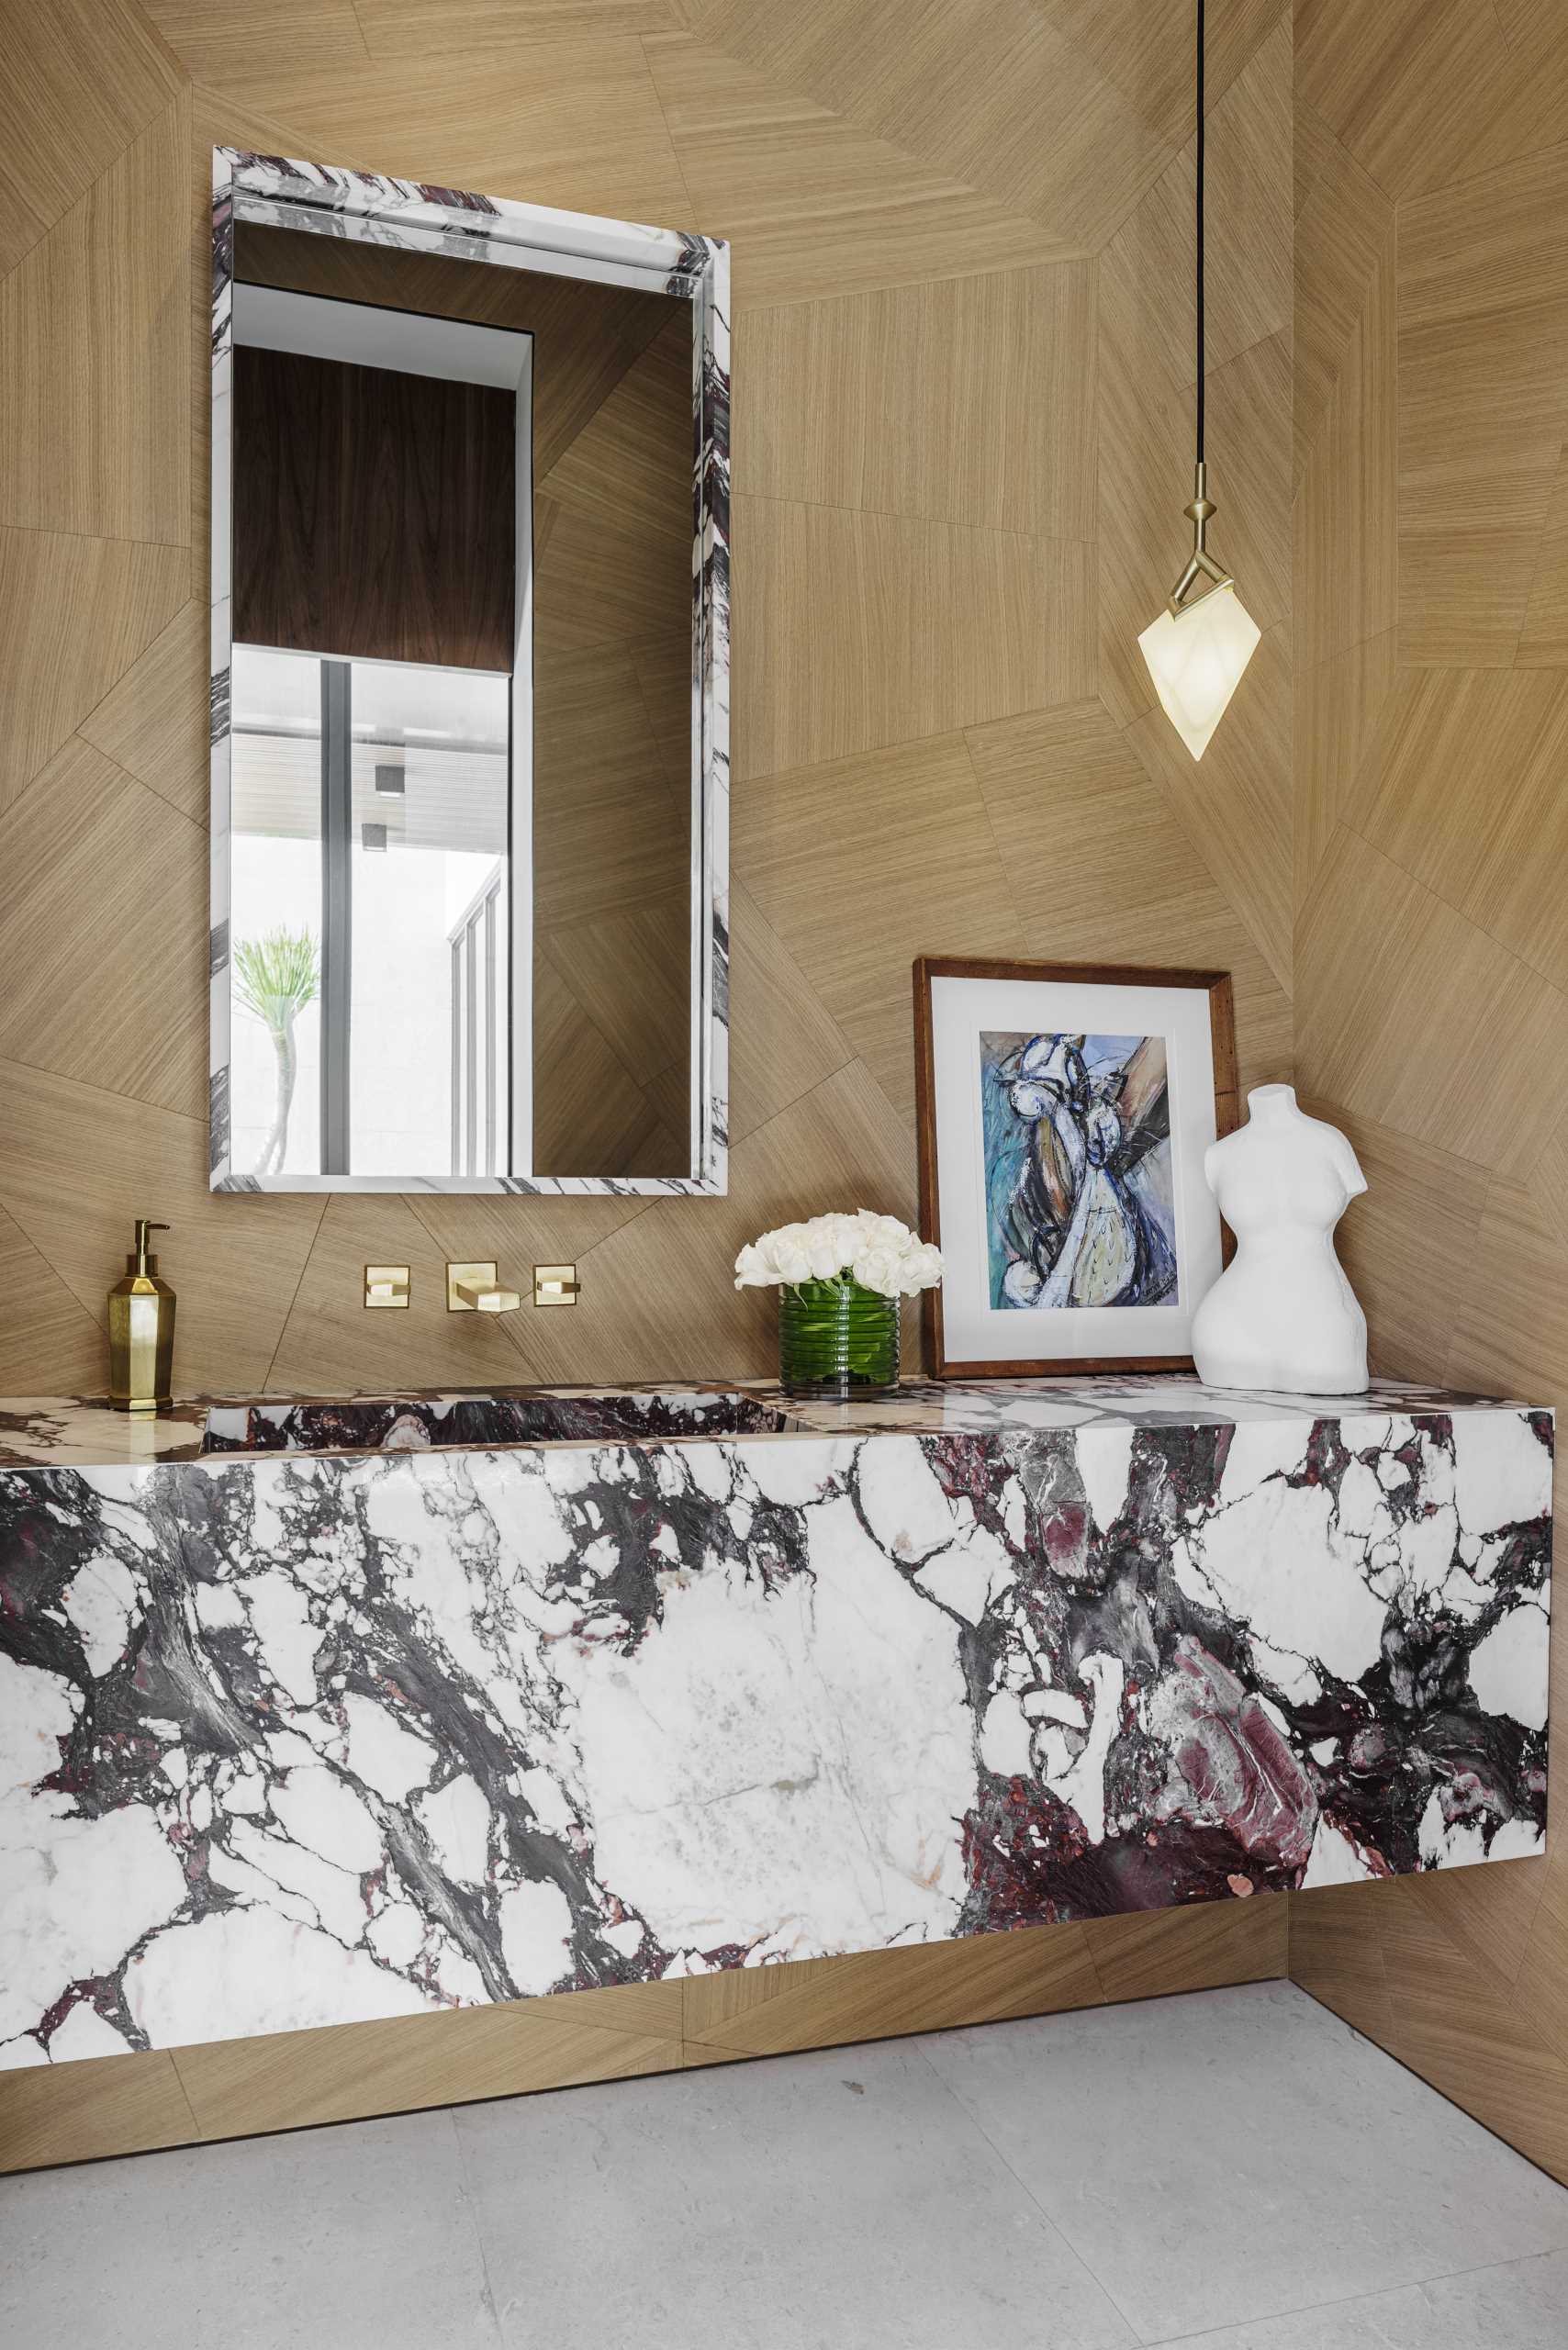 In the powder room, wood walls provide a backdrop for the stone vanity and matching mirror.